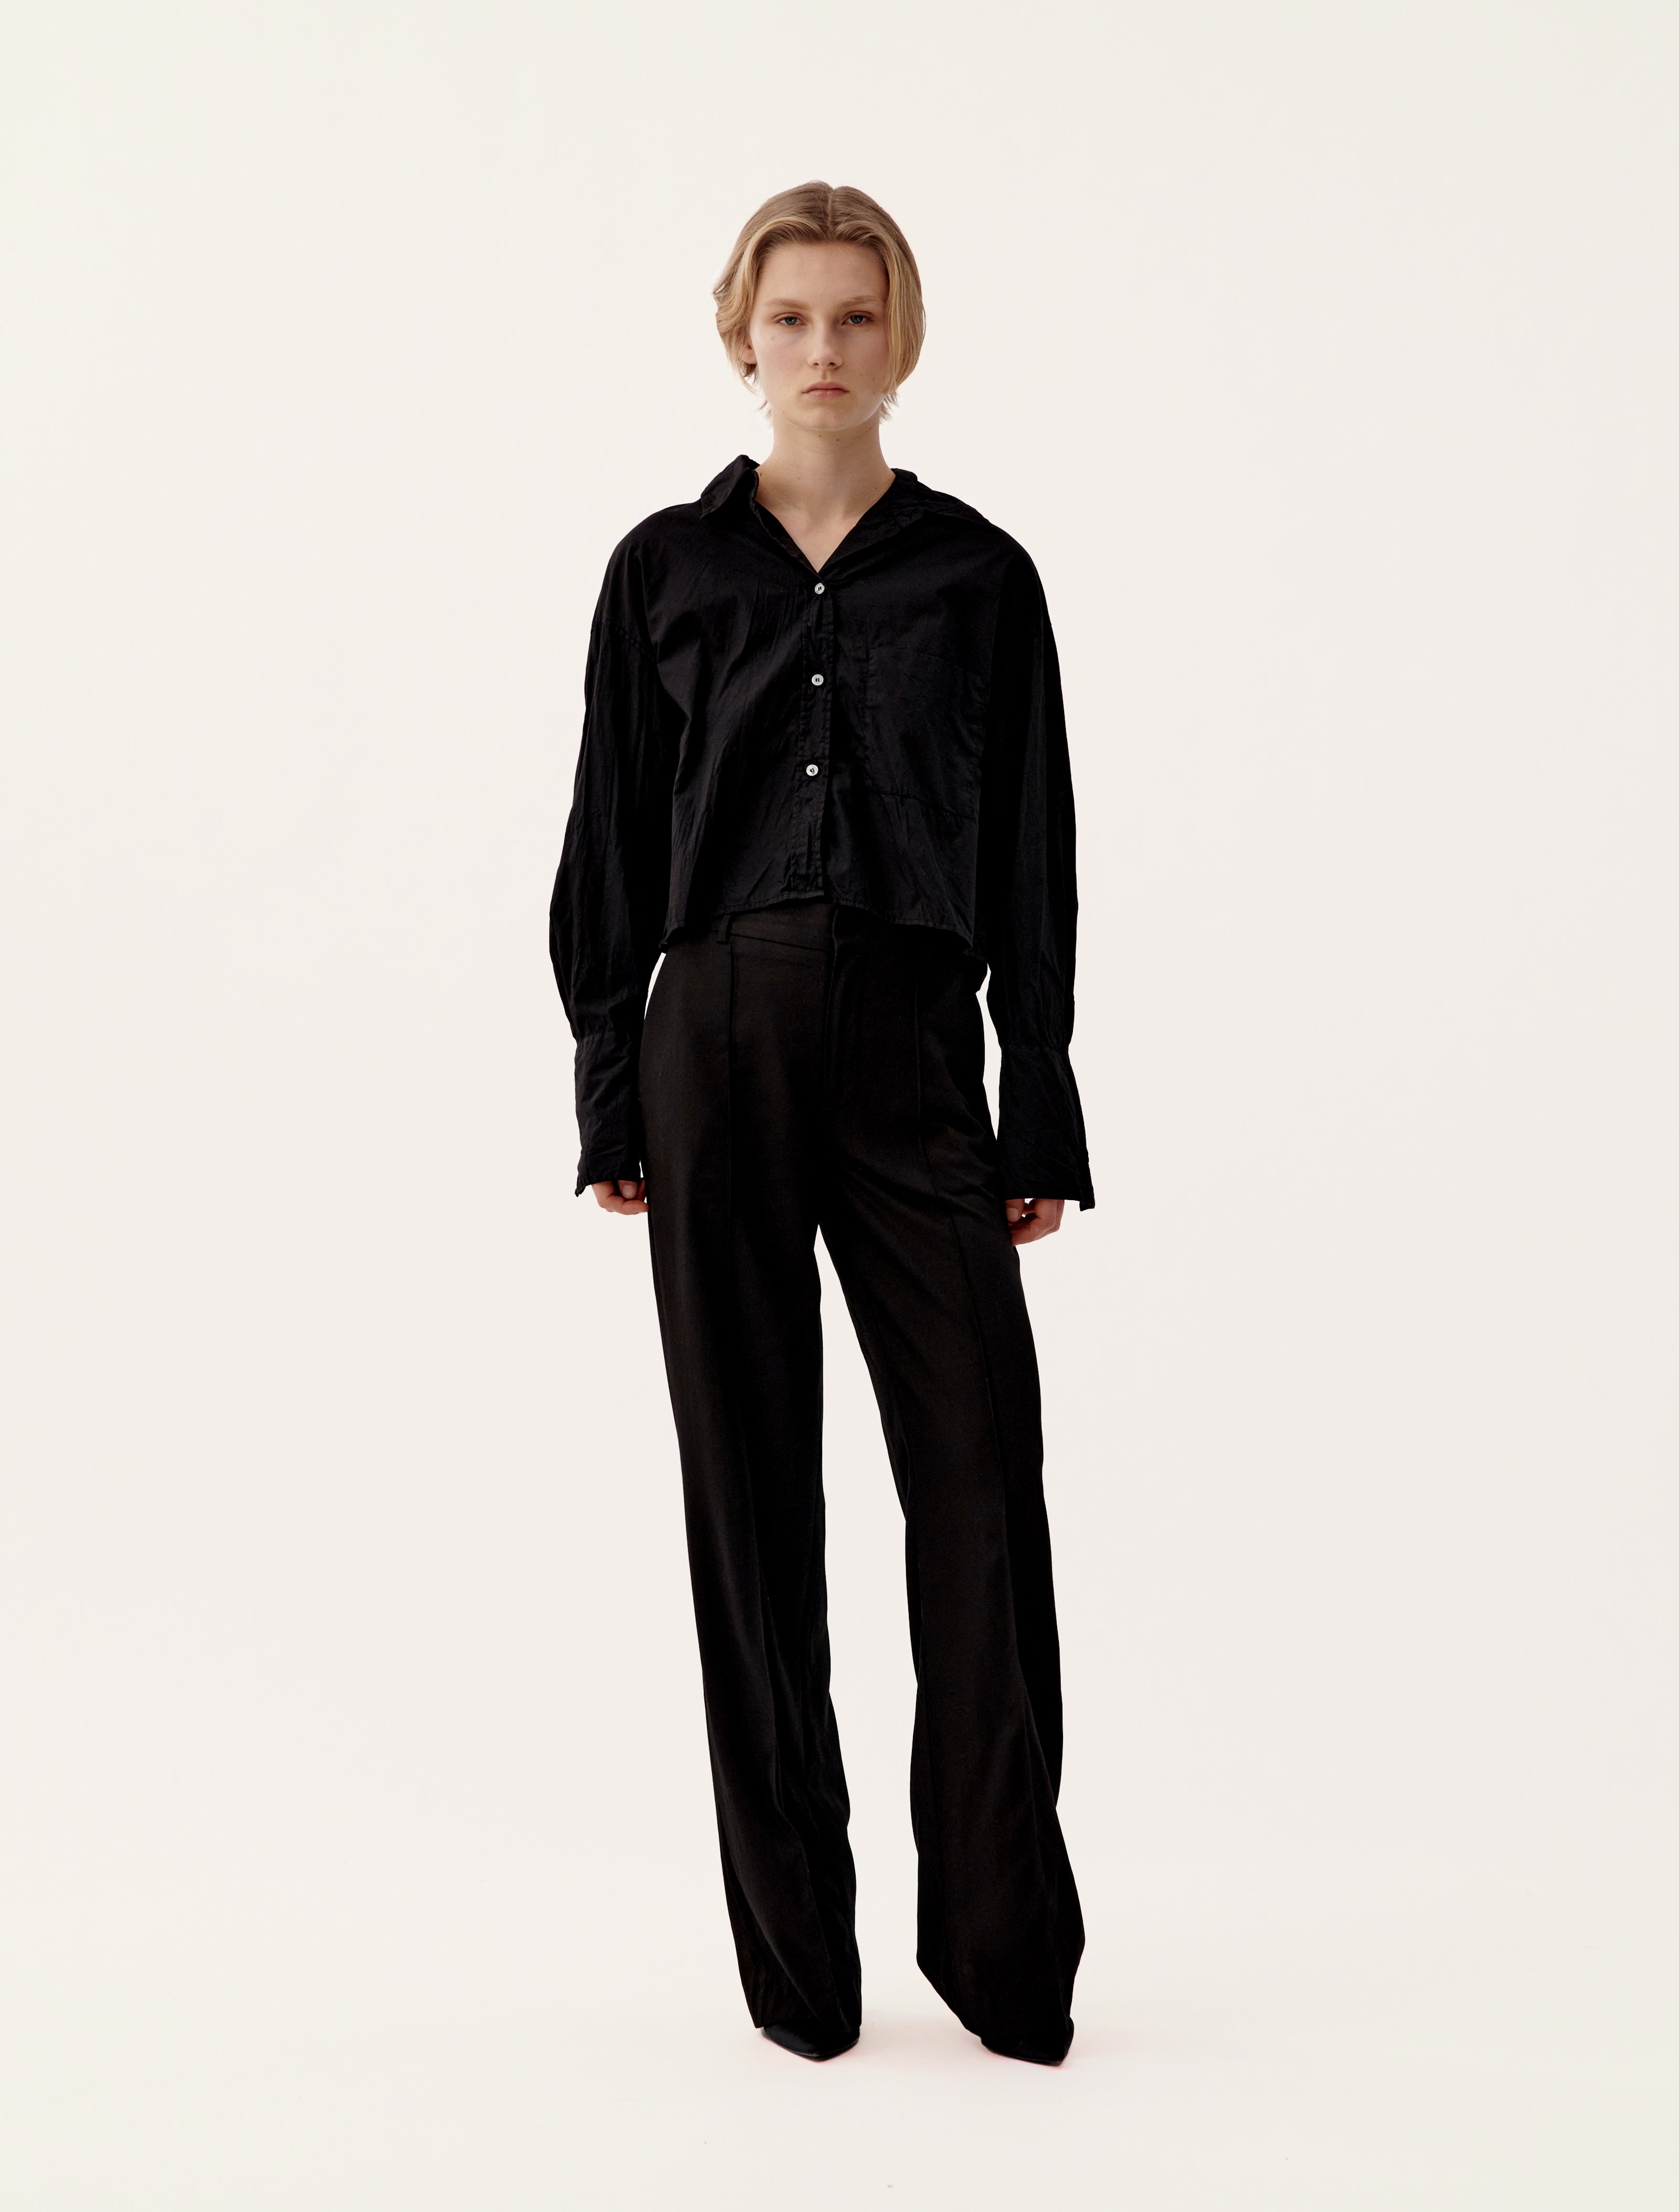 Ninety Percent Chania Trousers in Black